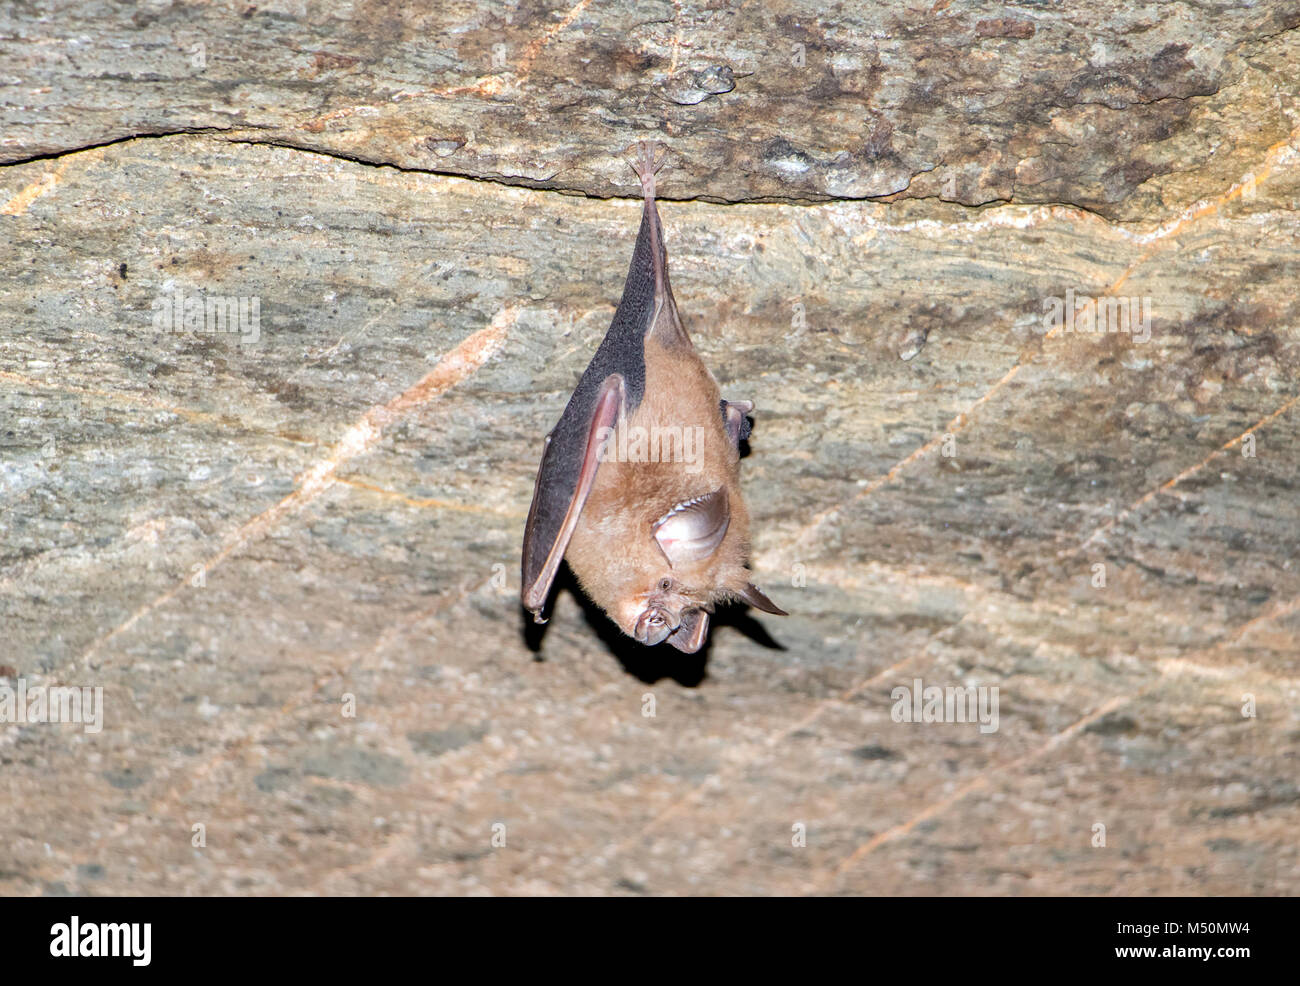 The bat hangs upside down. Bat in the cave, Thailand. Stock Photo